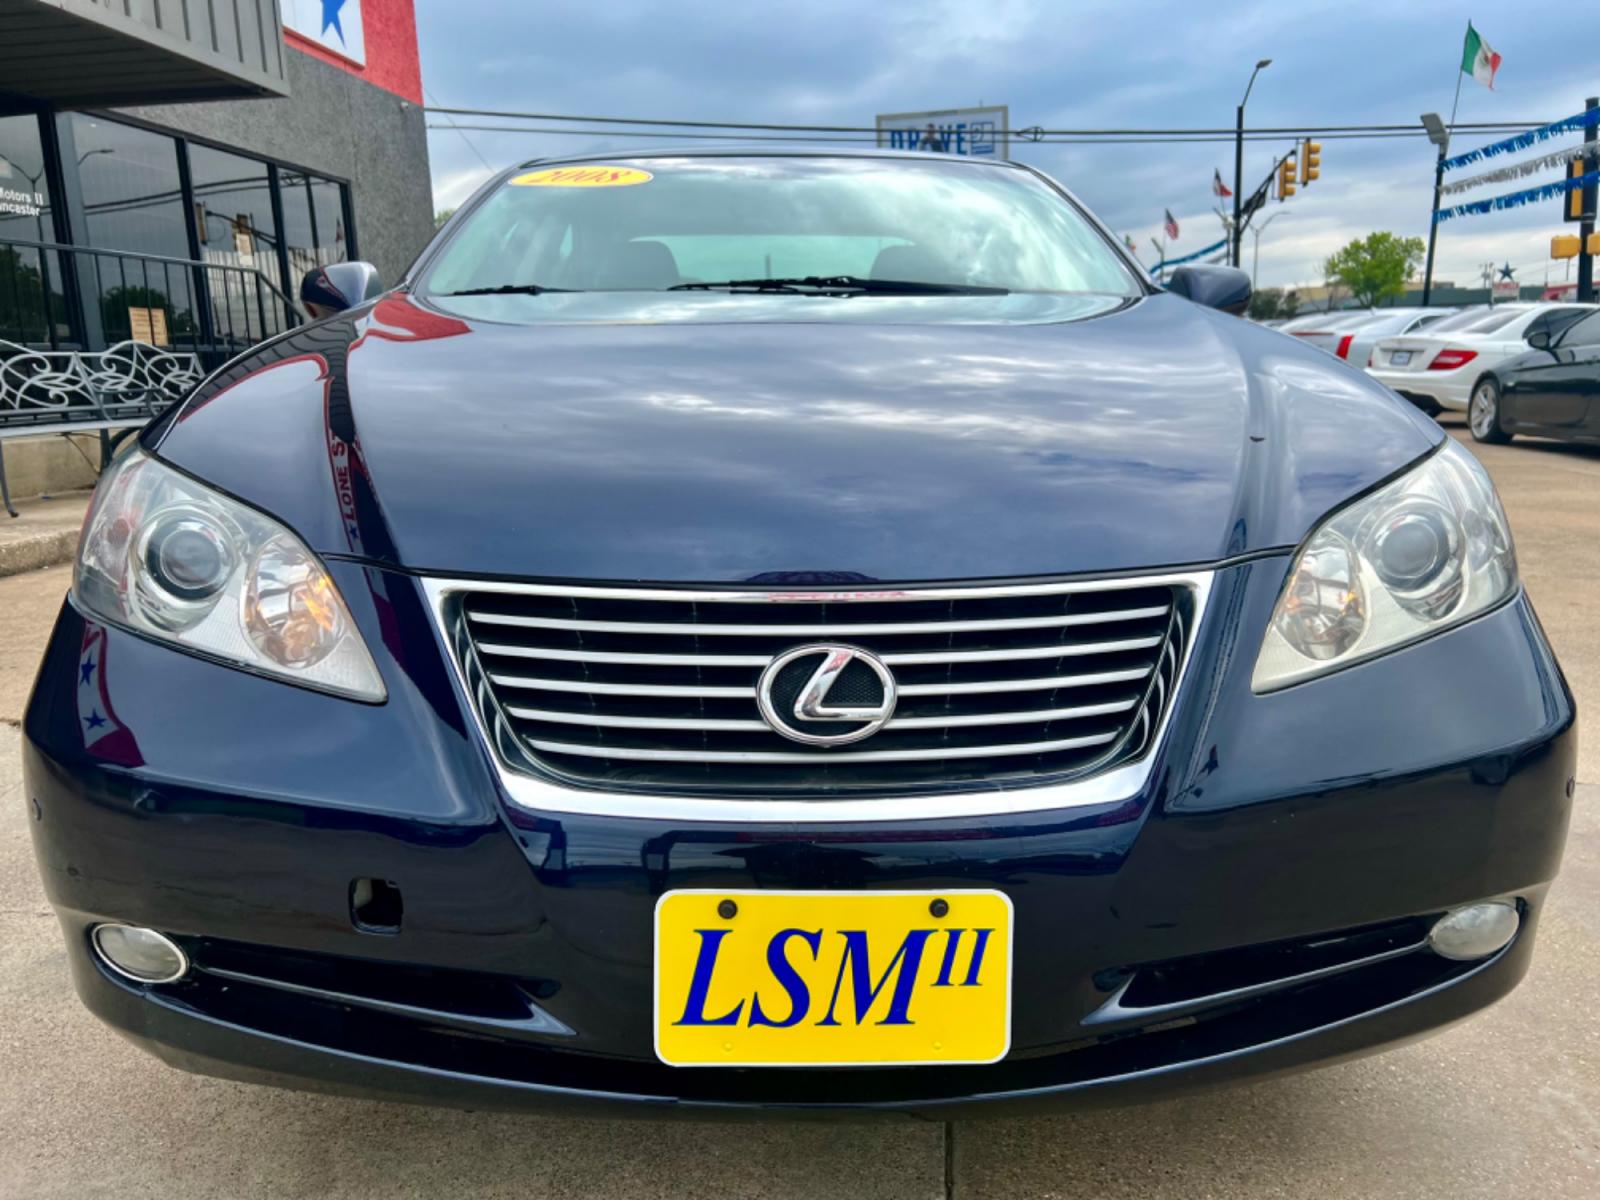 2008 BLUE LEXUS ES 350 (JTHBJ46G682) , located at 5900 E. Lancaster Ave., Fort Worth, TX, 76112, (817) 457-5456, 0.000000, 0.000000 - This is a 2008 LEXUS ES350 LUXURY 4 DR SEDAN that is in excellent condition. The interior is clean with no rips or tears or stains. All power windows, door locks and seats. Ice cold AC for those hot Texas summer days. It is equipped with a CD player, AM/FM radio. It runs and drives like new. The tir - Photo #1